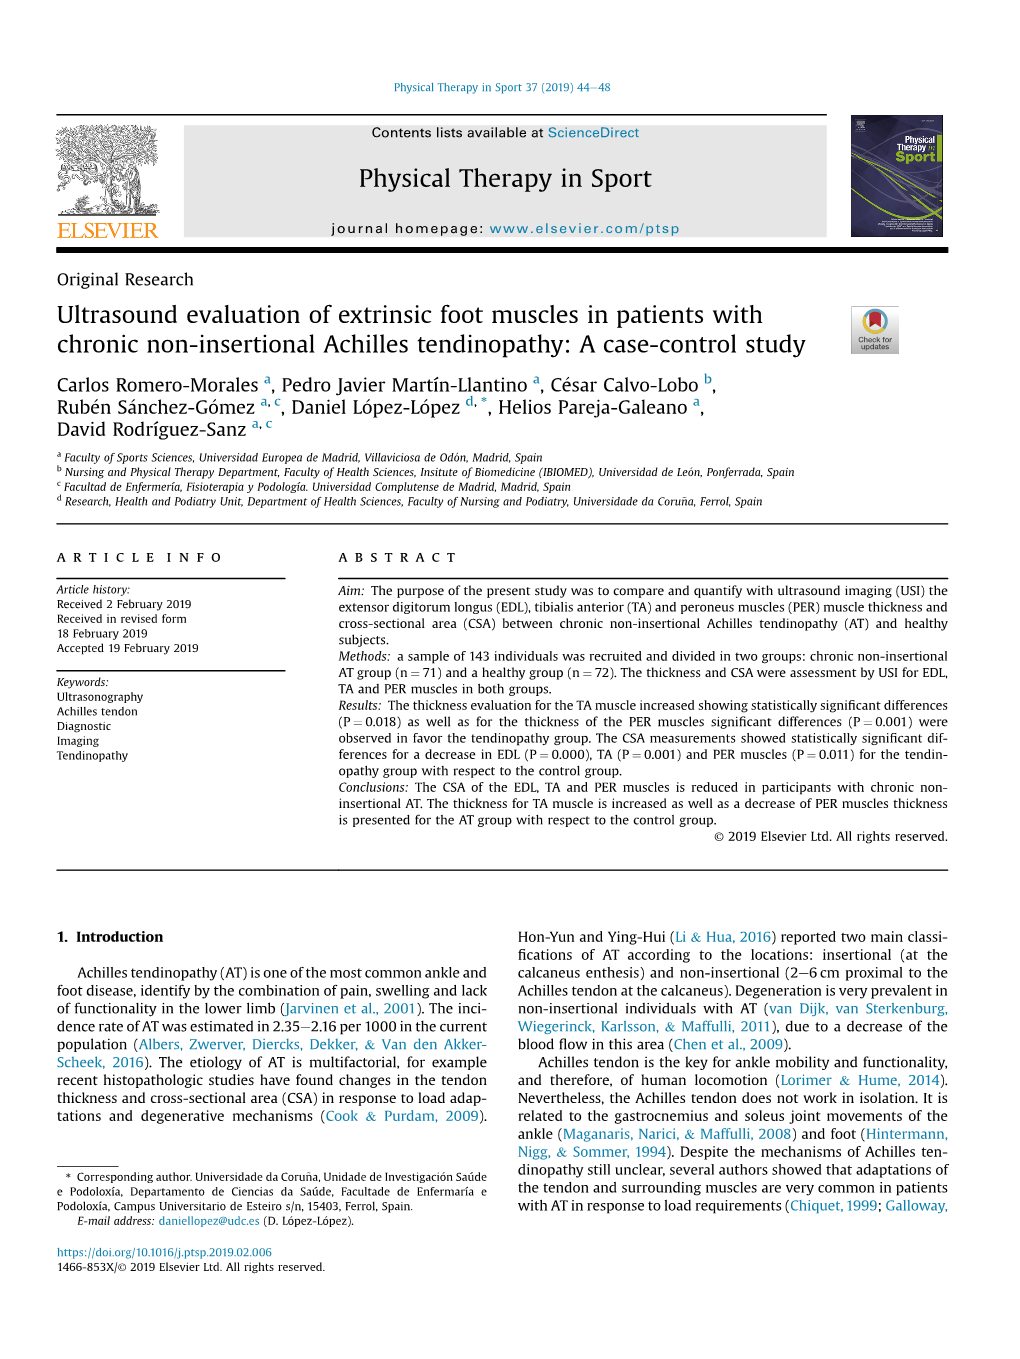 Ultrasound Evaluation of Extrinsic Foot Muscles in Patients with Chronic Non-Insertional Achilles Tendinopathy: a Case-Control Study